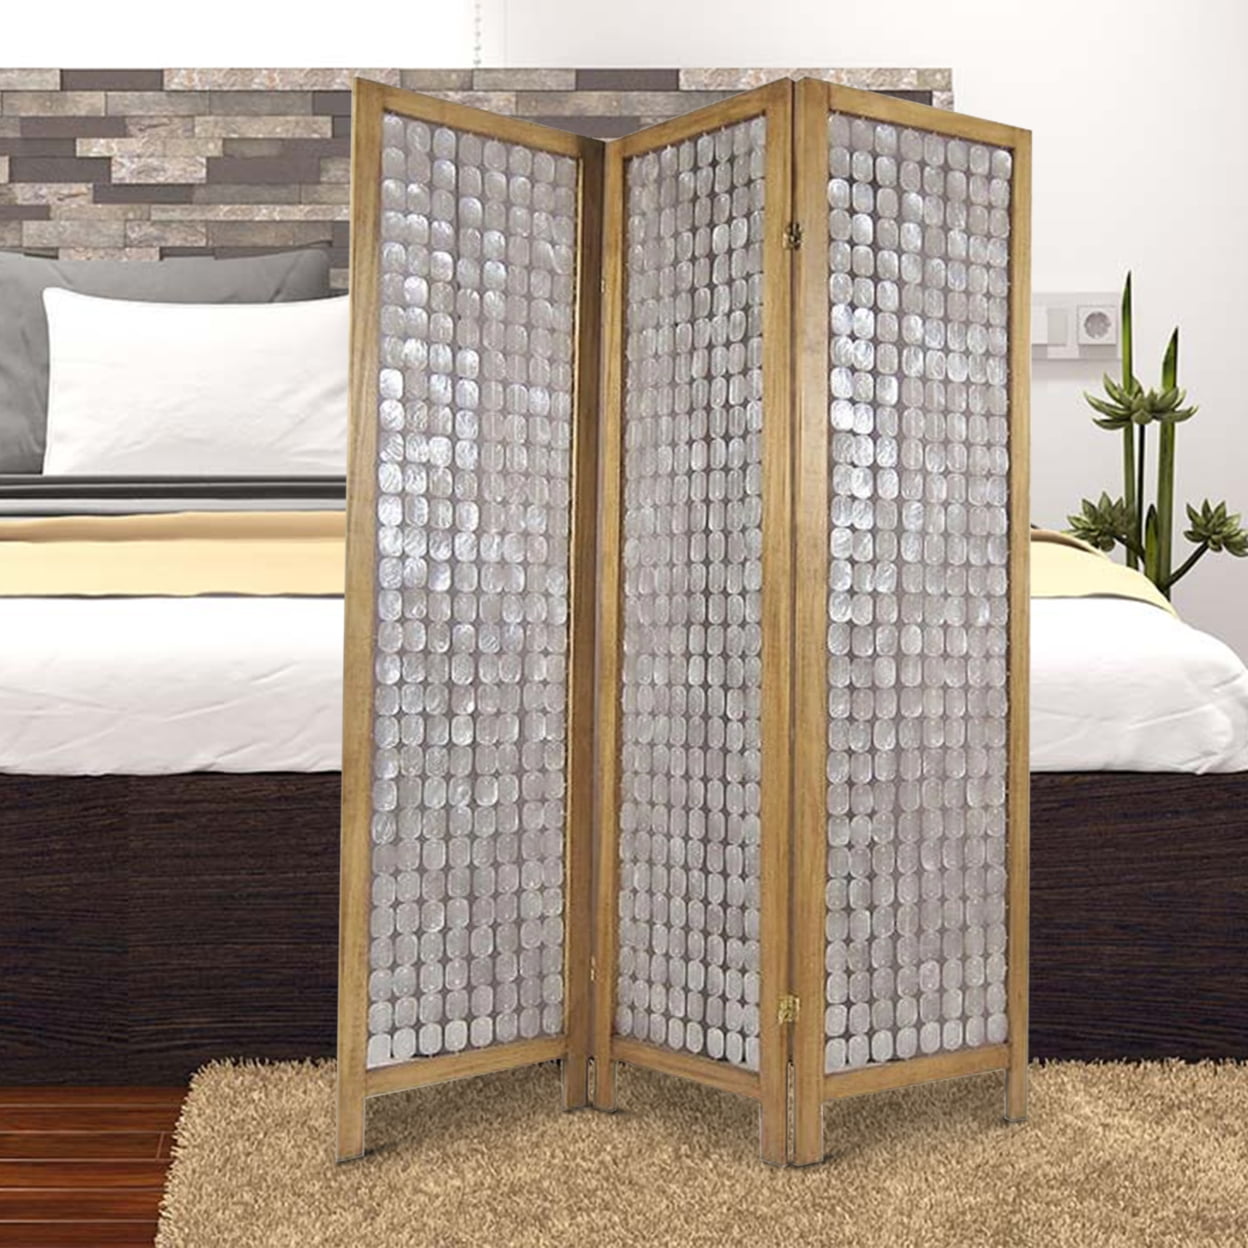 Bm228613 3 Panel Wooden Screen With Pearl Motif Accent, Brown & Silver